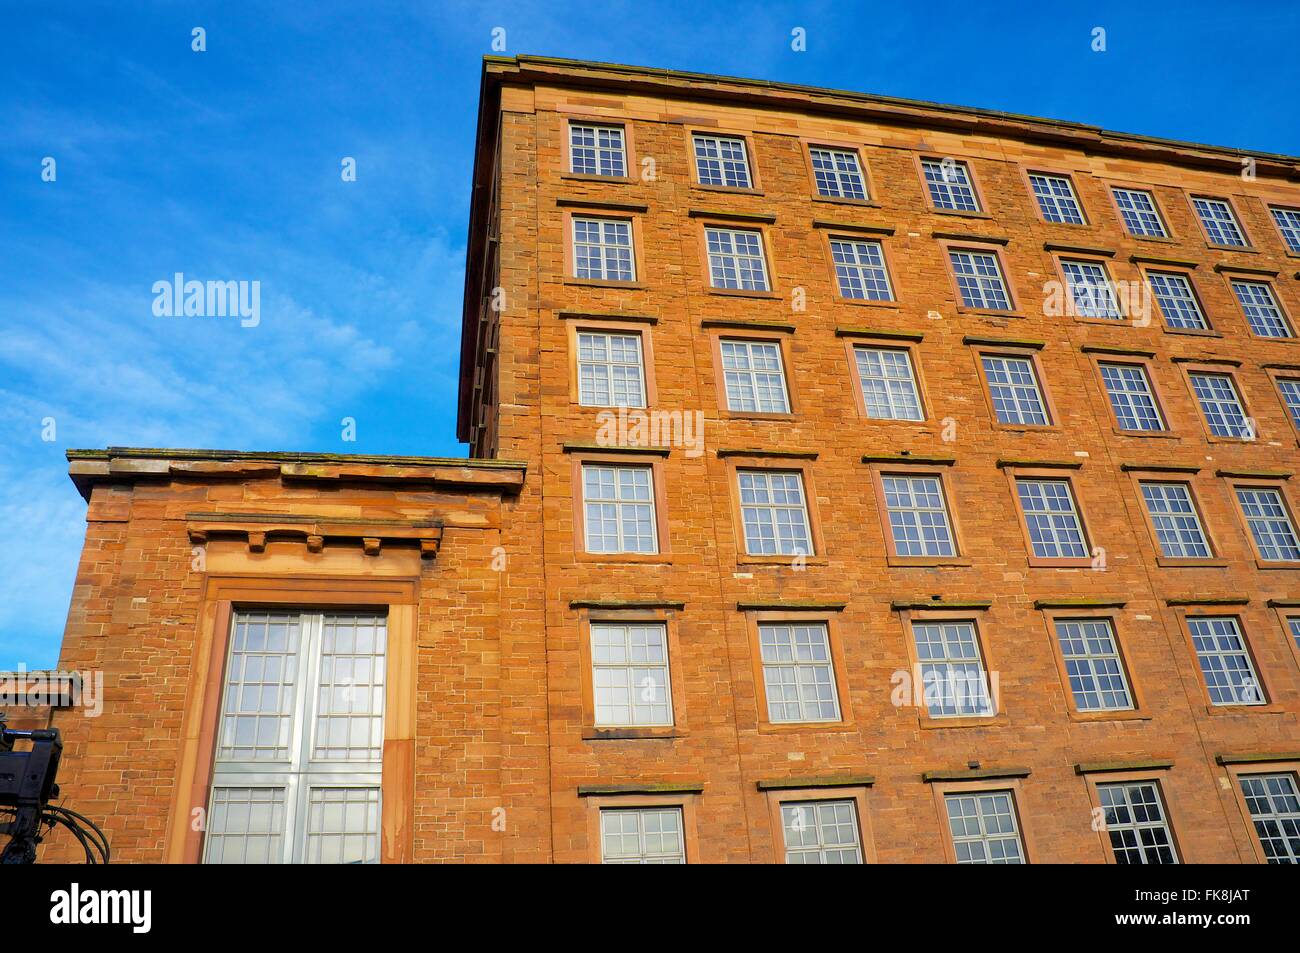 Shaddon Mill. Ancienne usine textile Junction Street, Shaddongate, Cumbria, Carlisle, Angleterre, Royaume-Uni, Europe. Banque D'Images